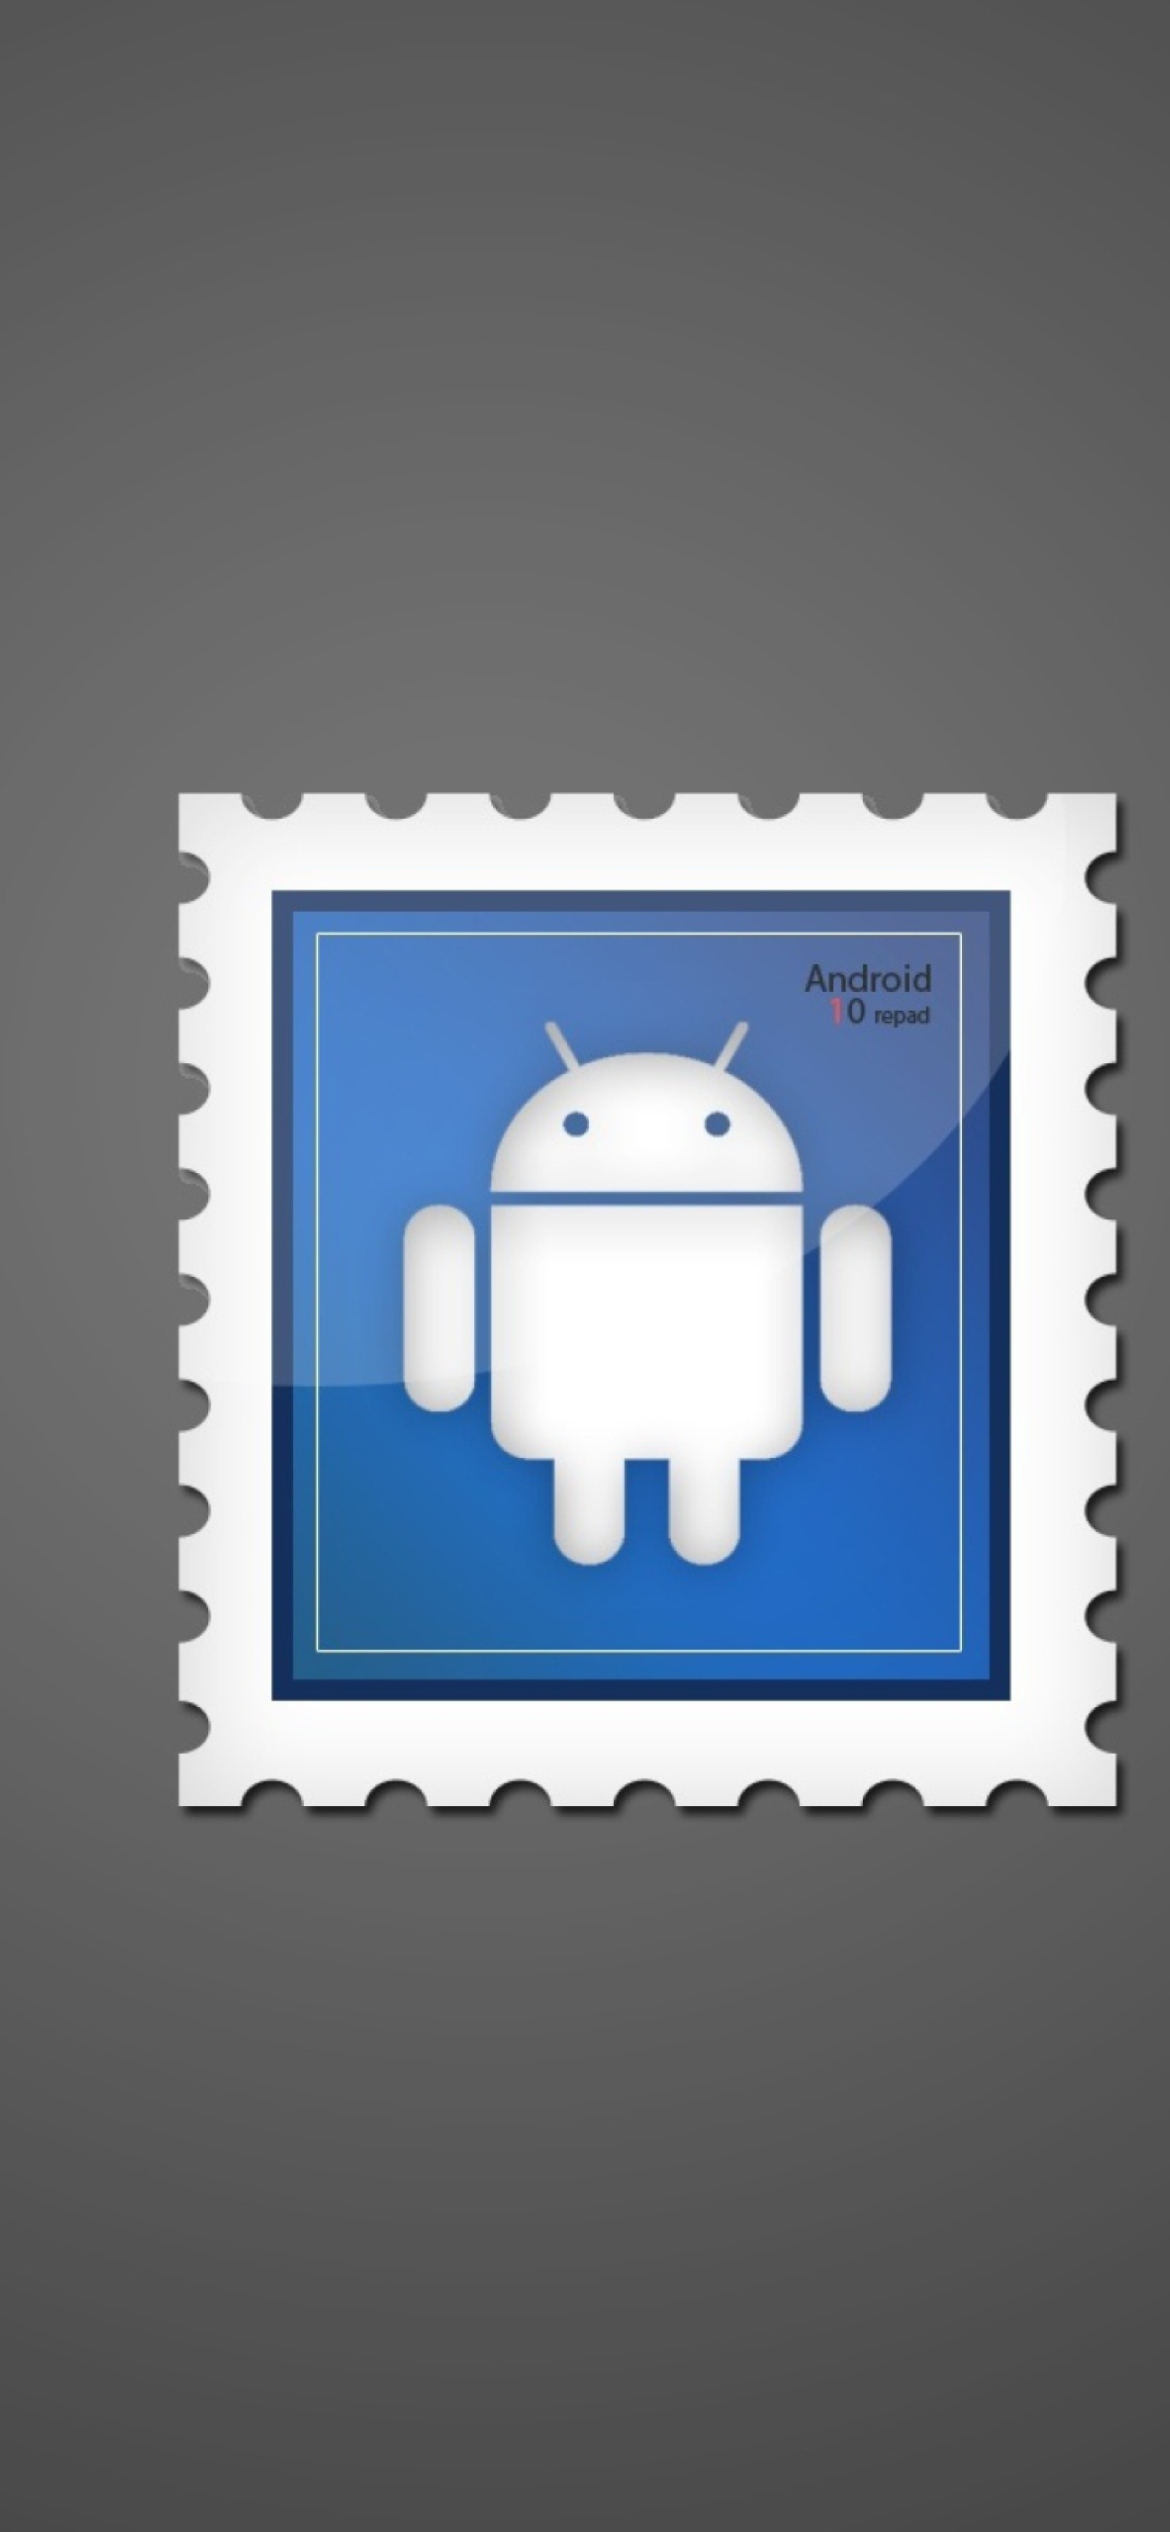 Android Postage Stamp wallpaper 1170x2532